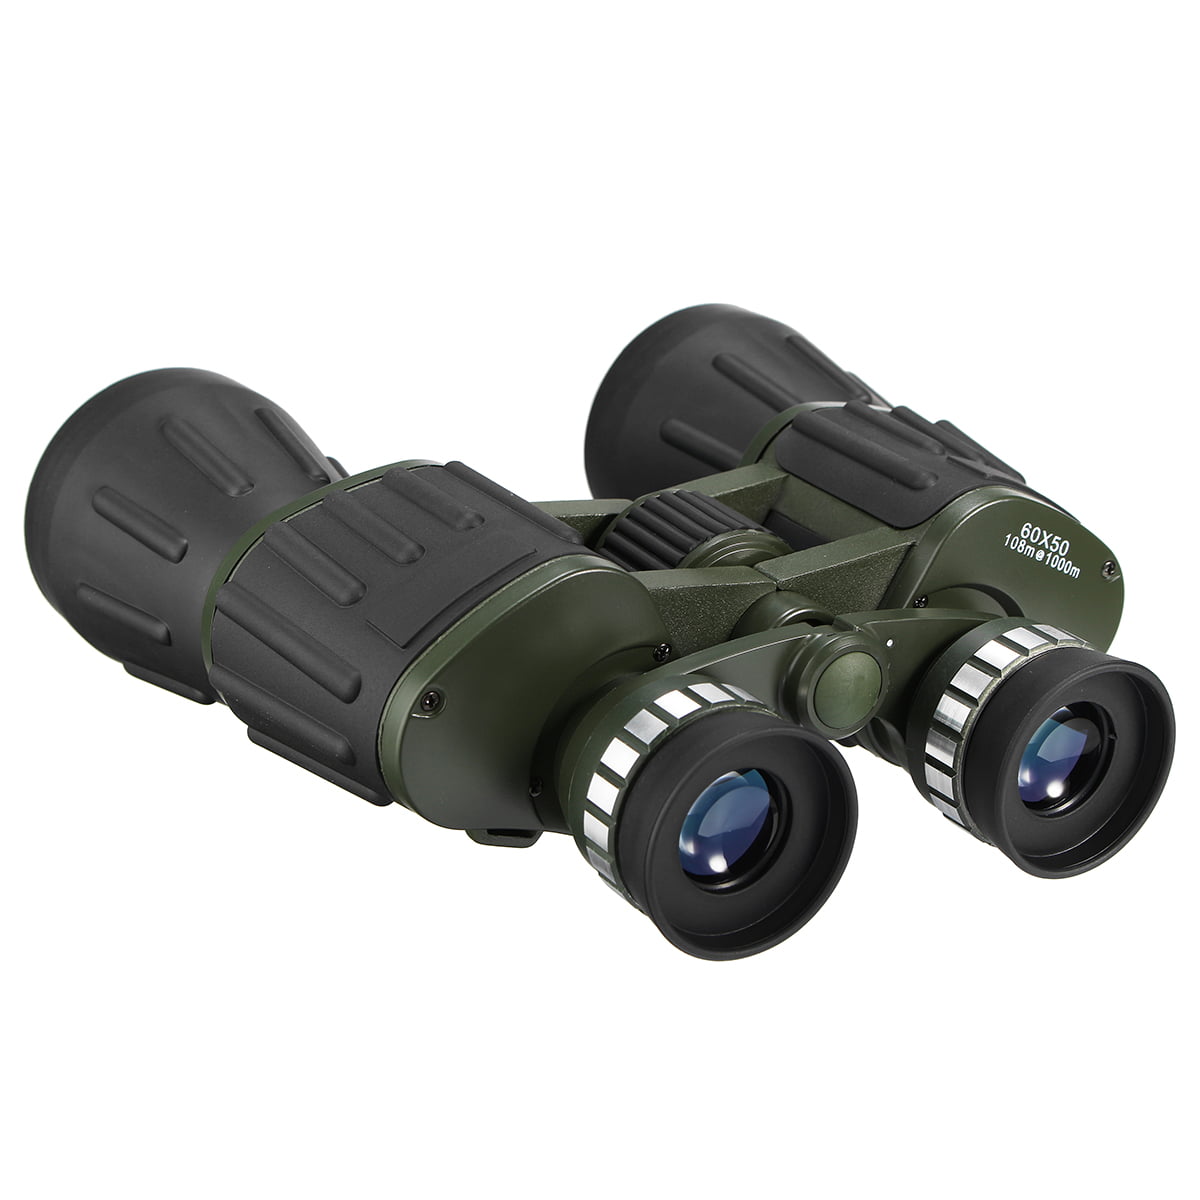 Black Monocular ，50 60 High Definition high Definition Night Vision Goggles with Low Light Binoculars for Hiking Camping Travel 